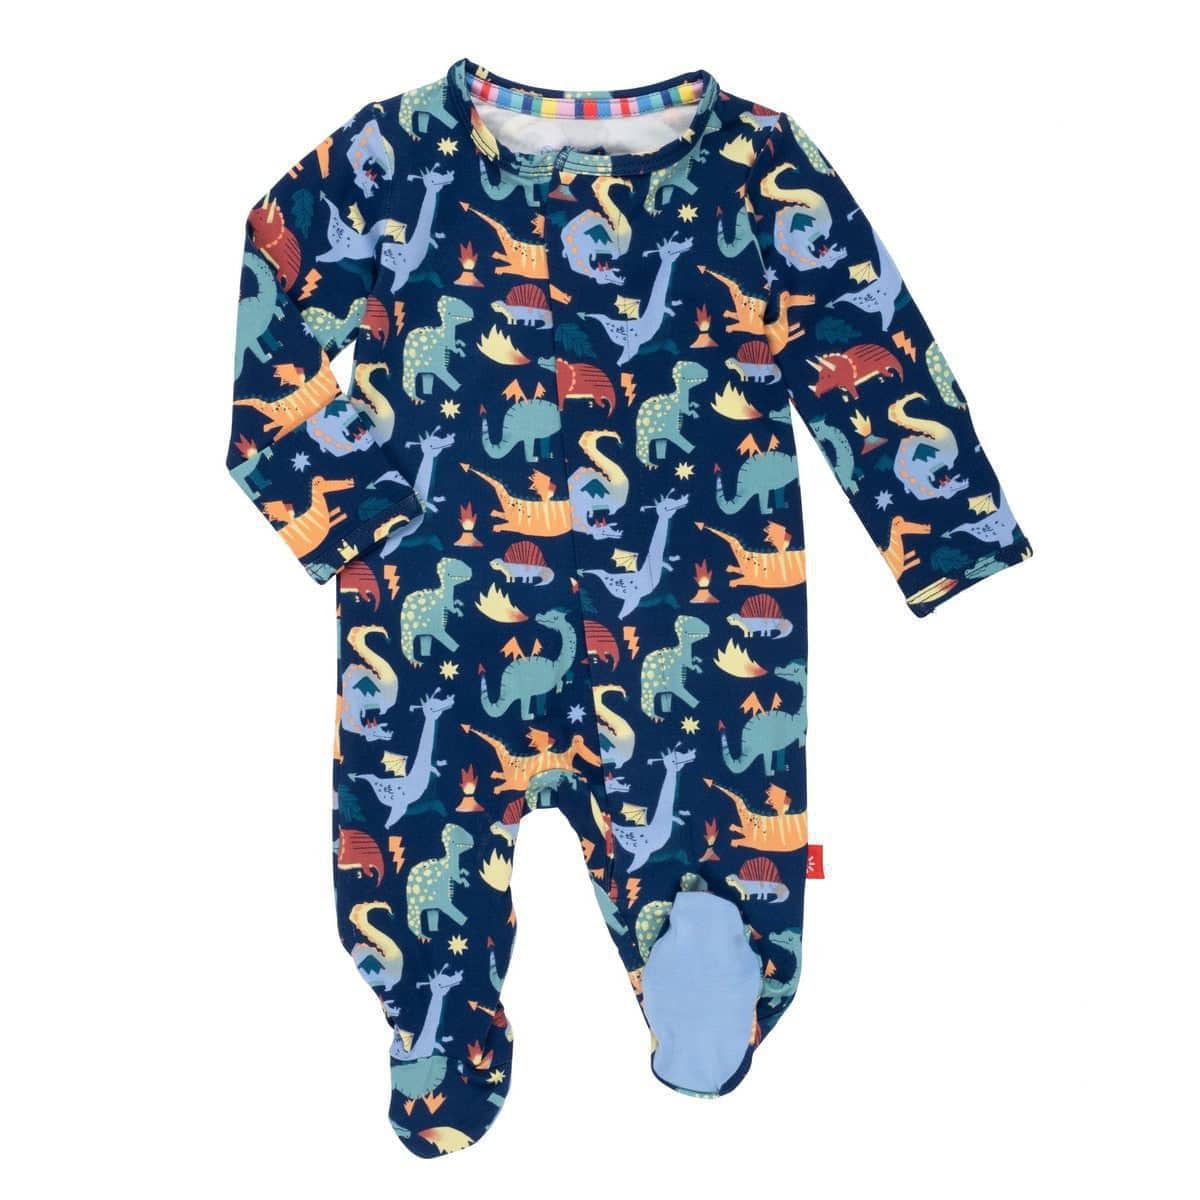 Magnificent Baby General Magnetic Me Talon-Ted Modal Footie